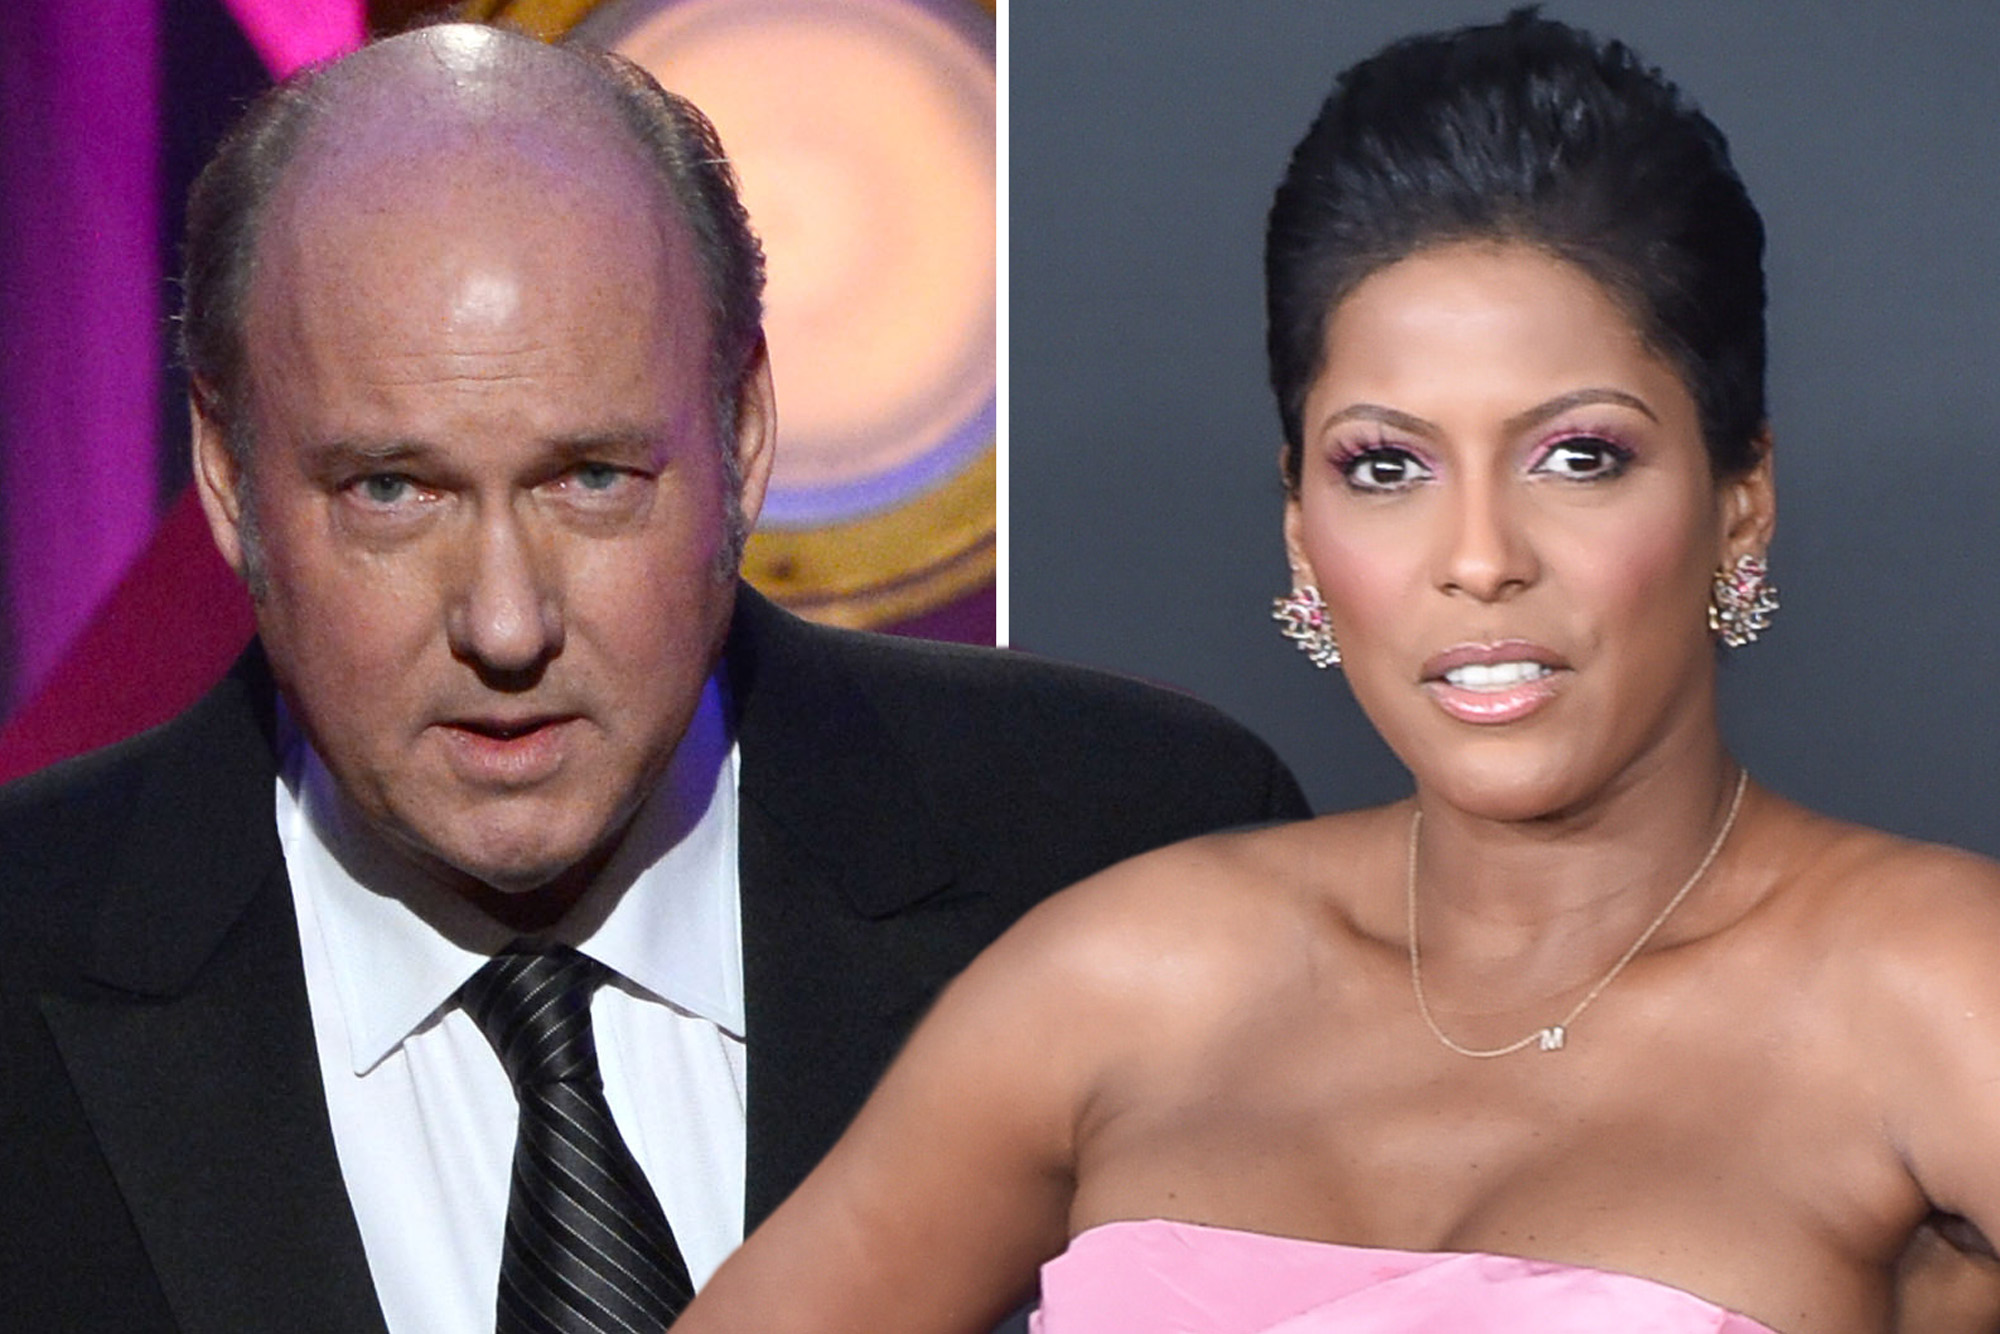 TV producer Bill Geddie is out at Tamron Hall’s talk show